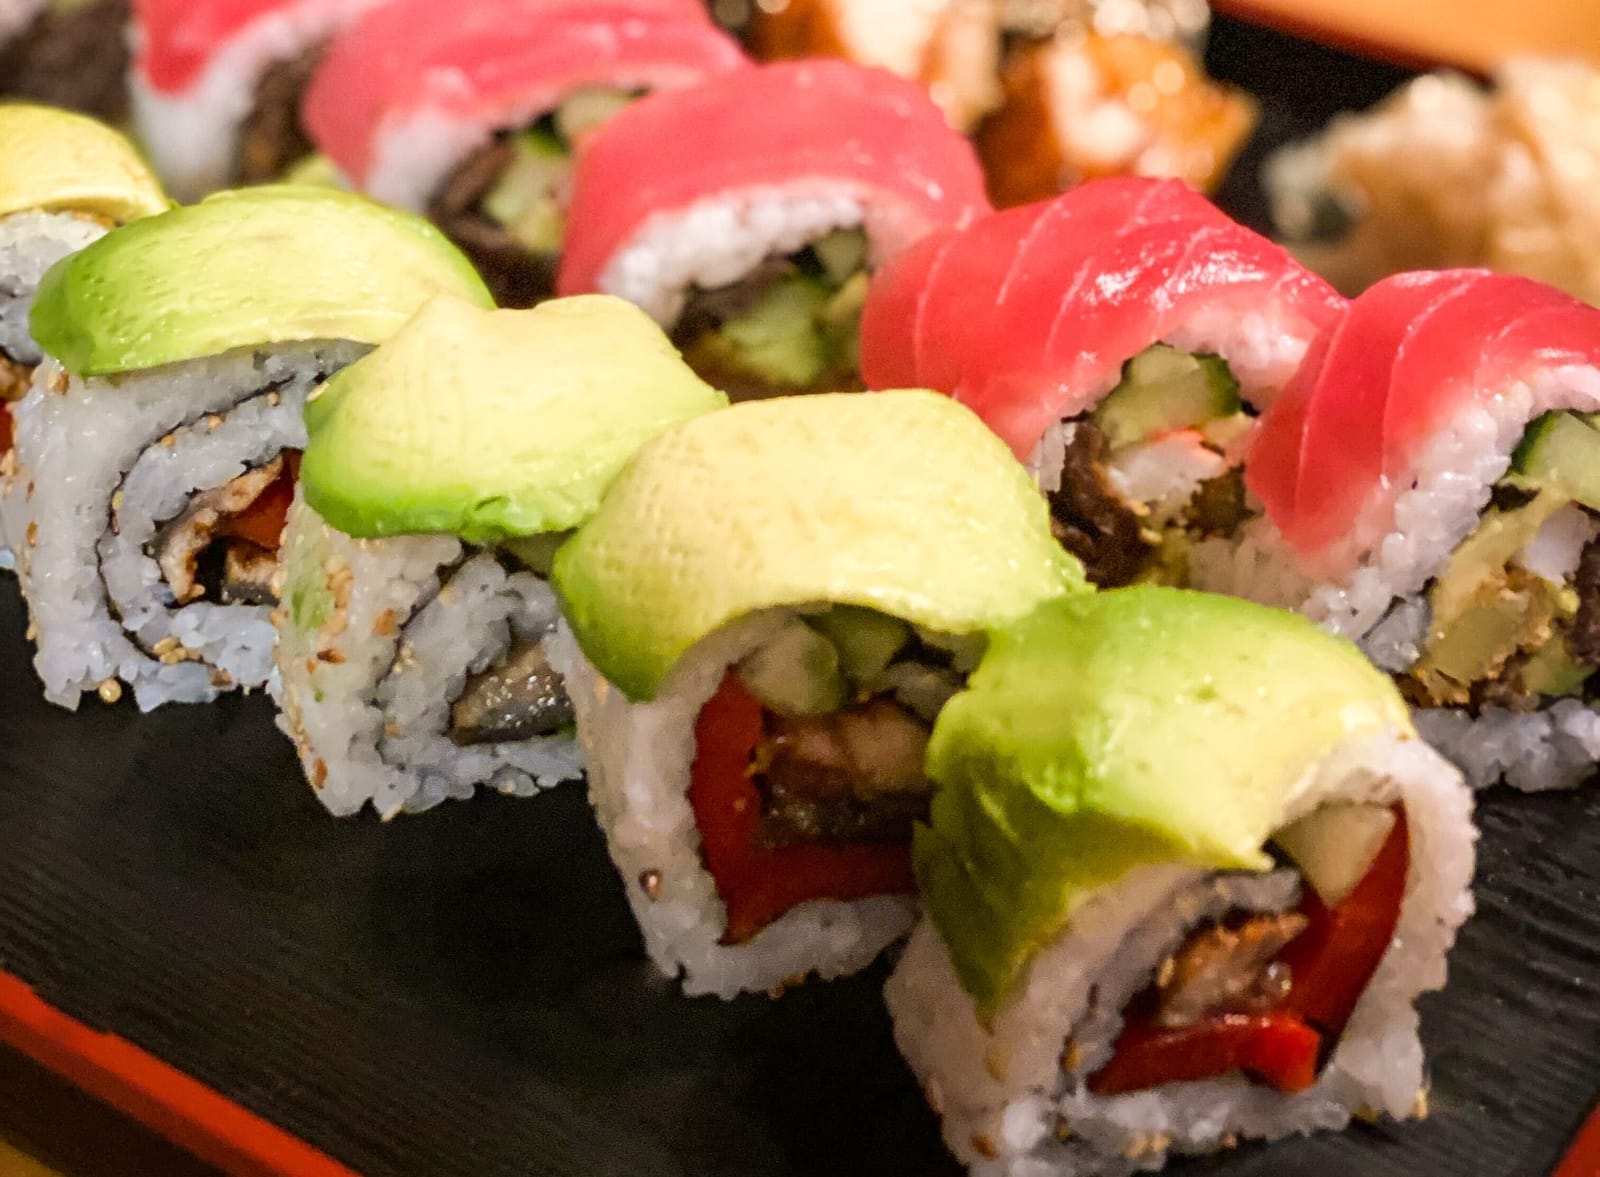 Sushi dish with avocado and salmon rolls.